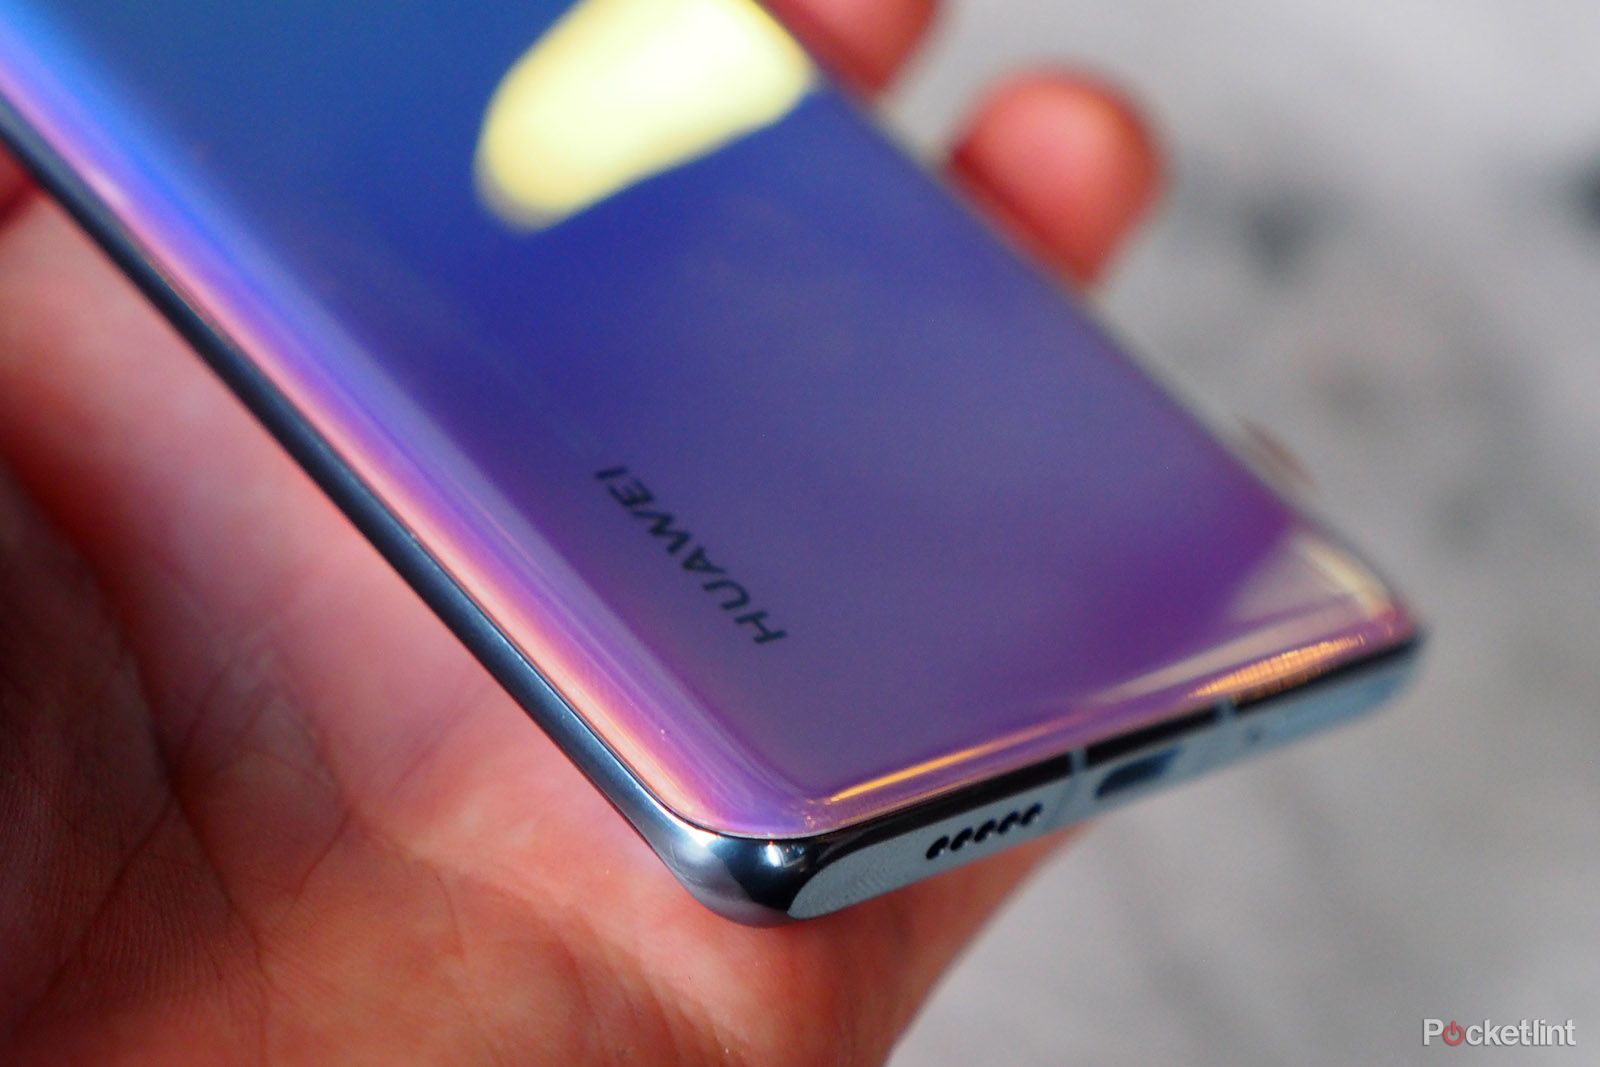 HUAWEI P30 Pro long-term review: Still worth buying? - Android Authority